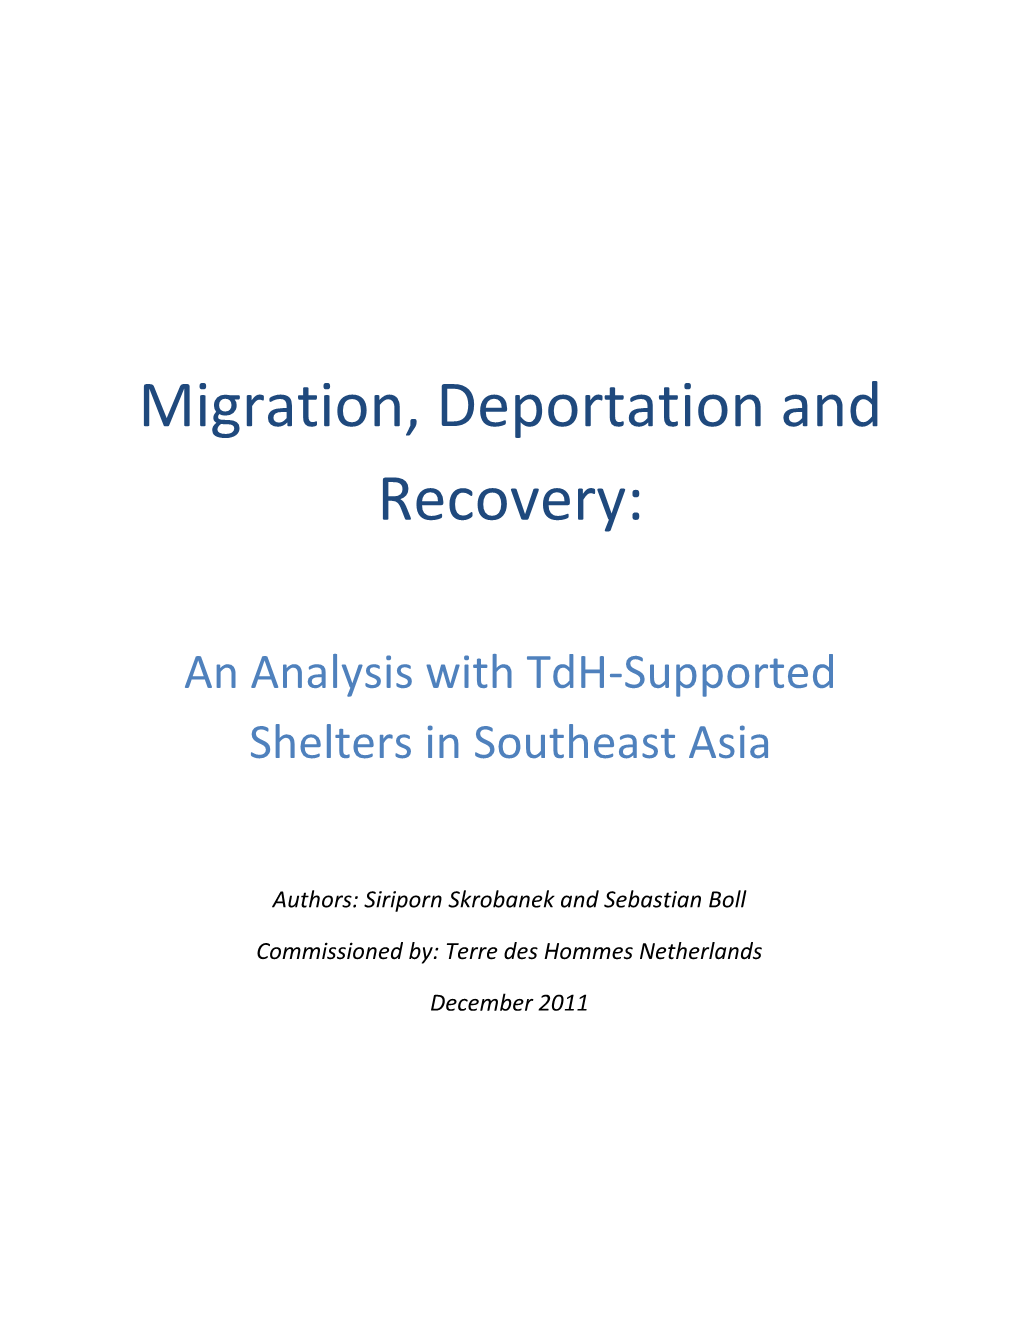 Migration, Deportation, Recovery and the Way Forward